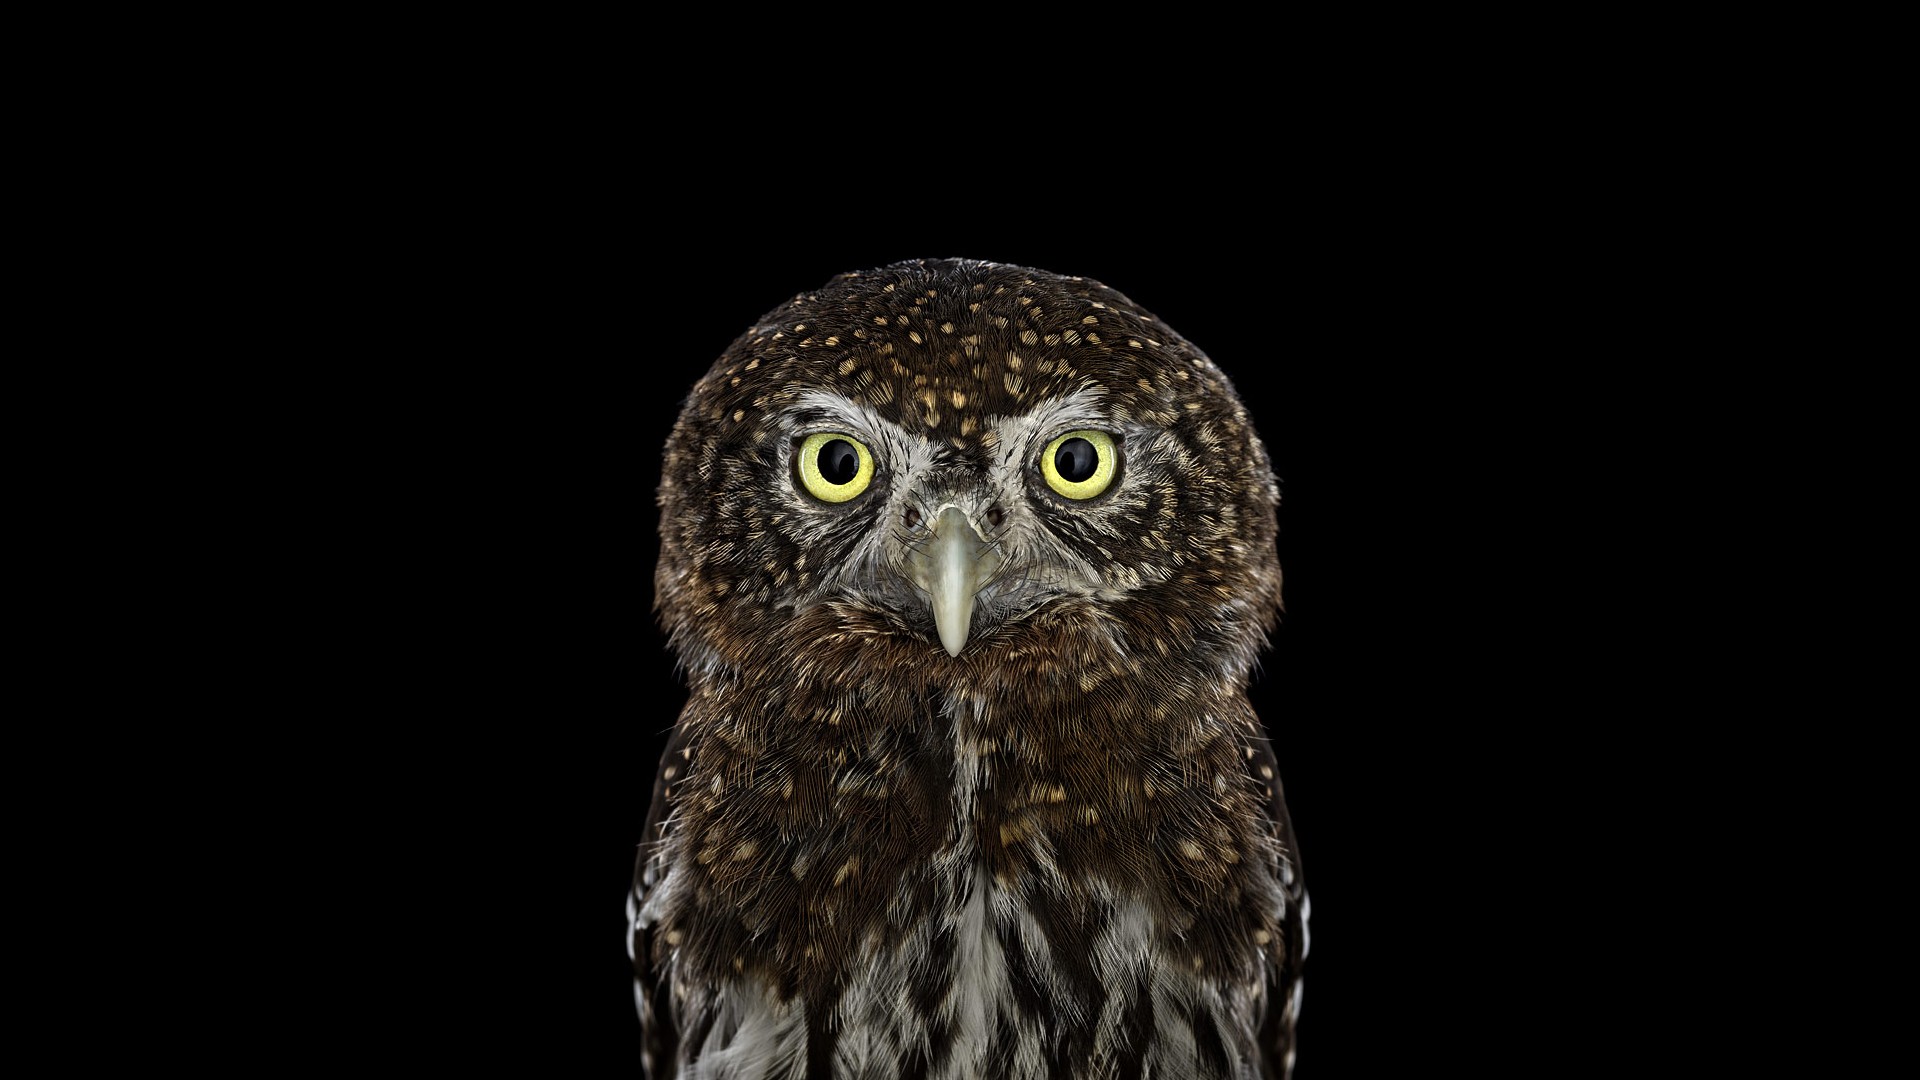 General 1920x1080 photography animals birds owl simple background black background